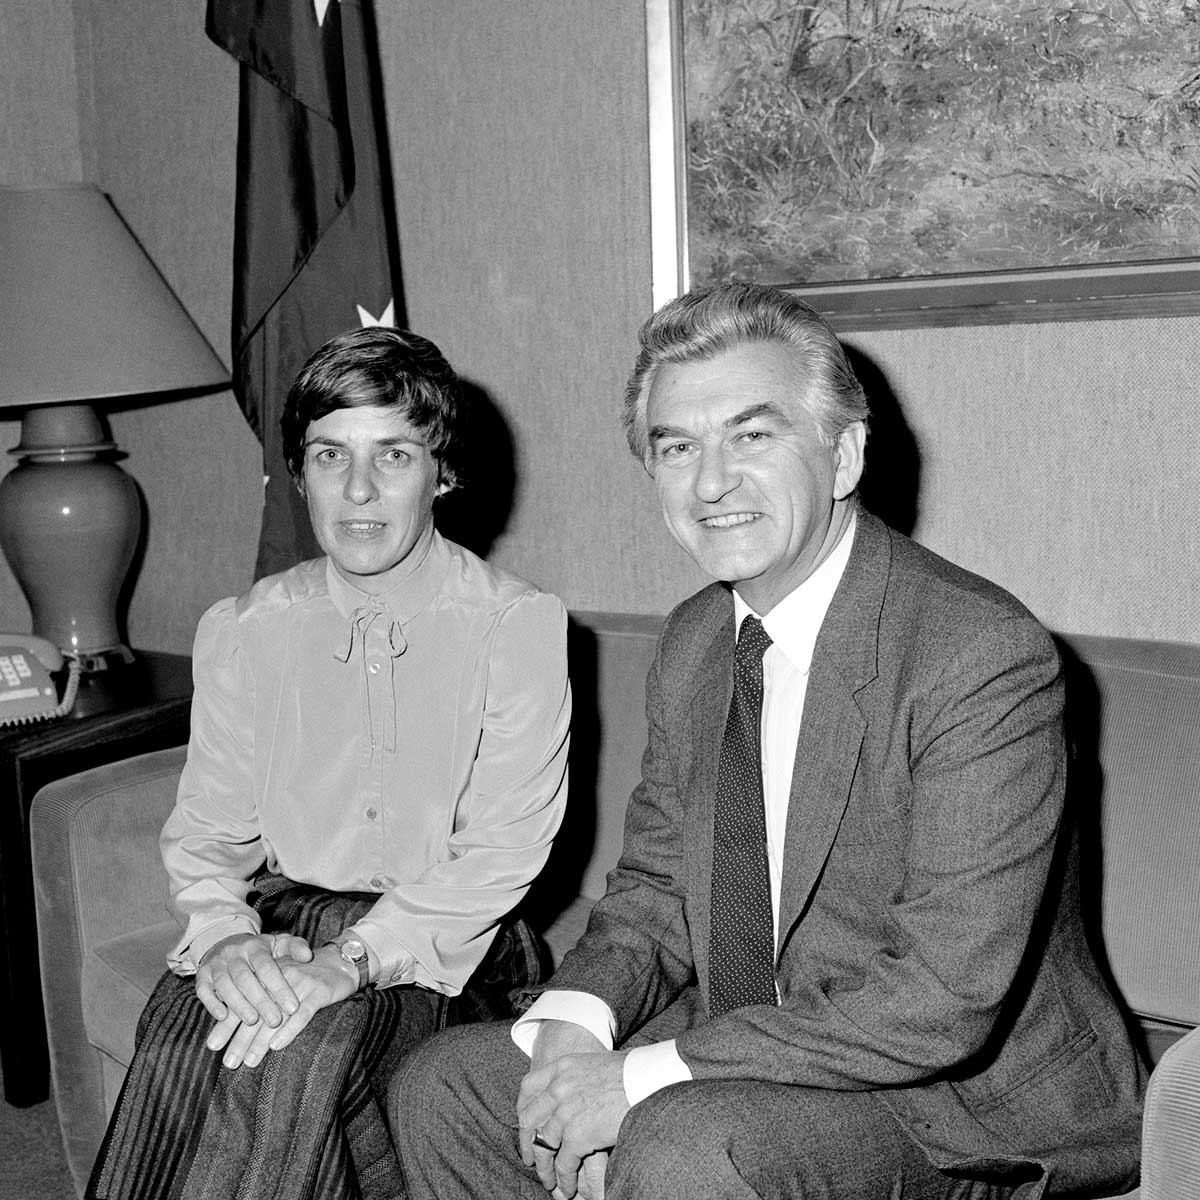 Pam O’Neill and Bob Hawke pose for the camera, seated on a couch. - click to view larger image